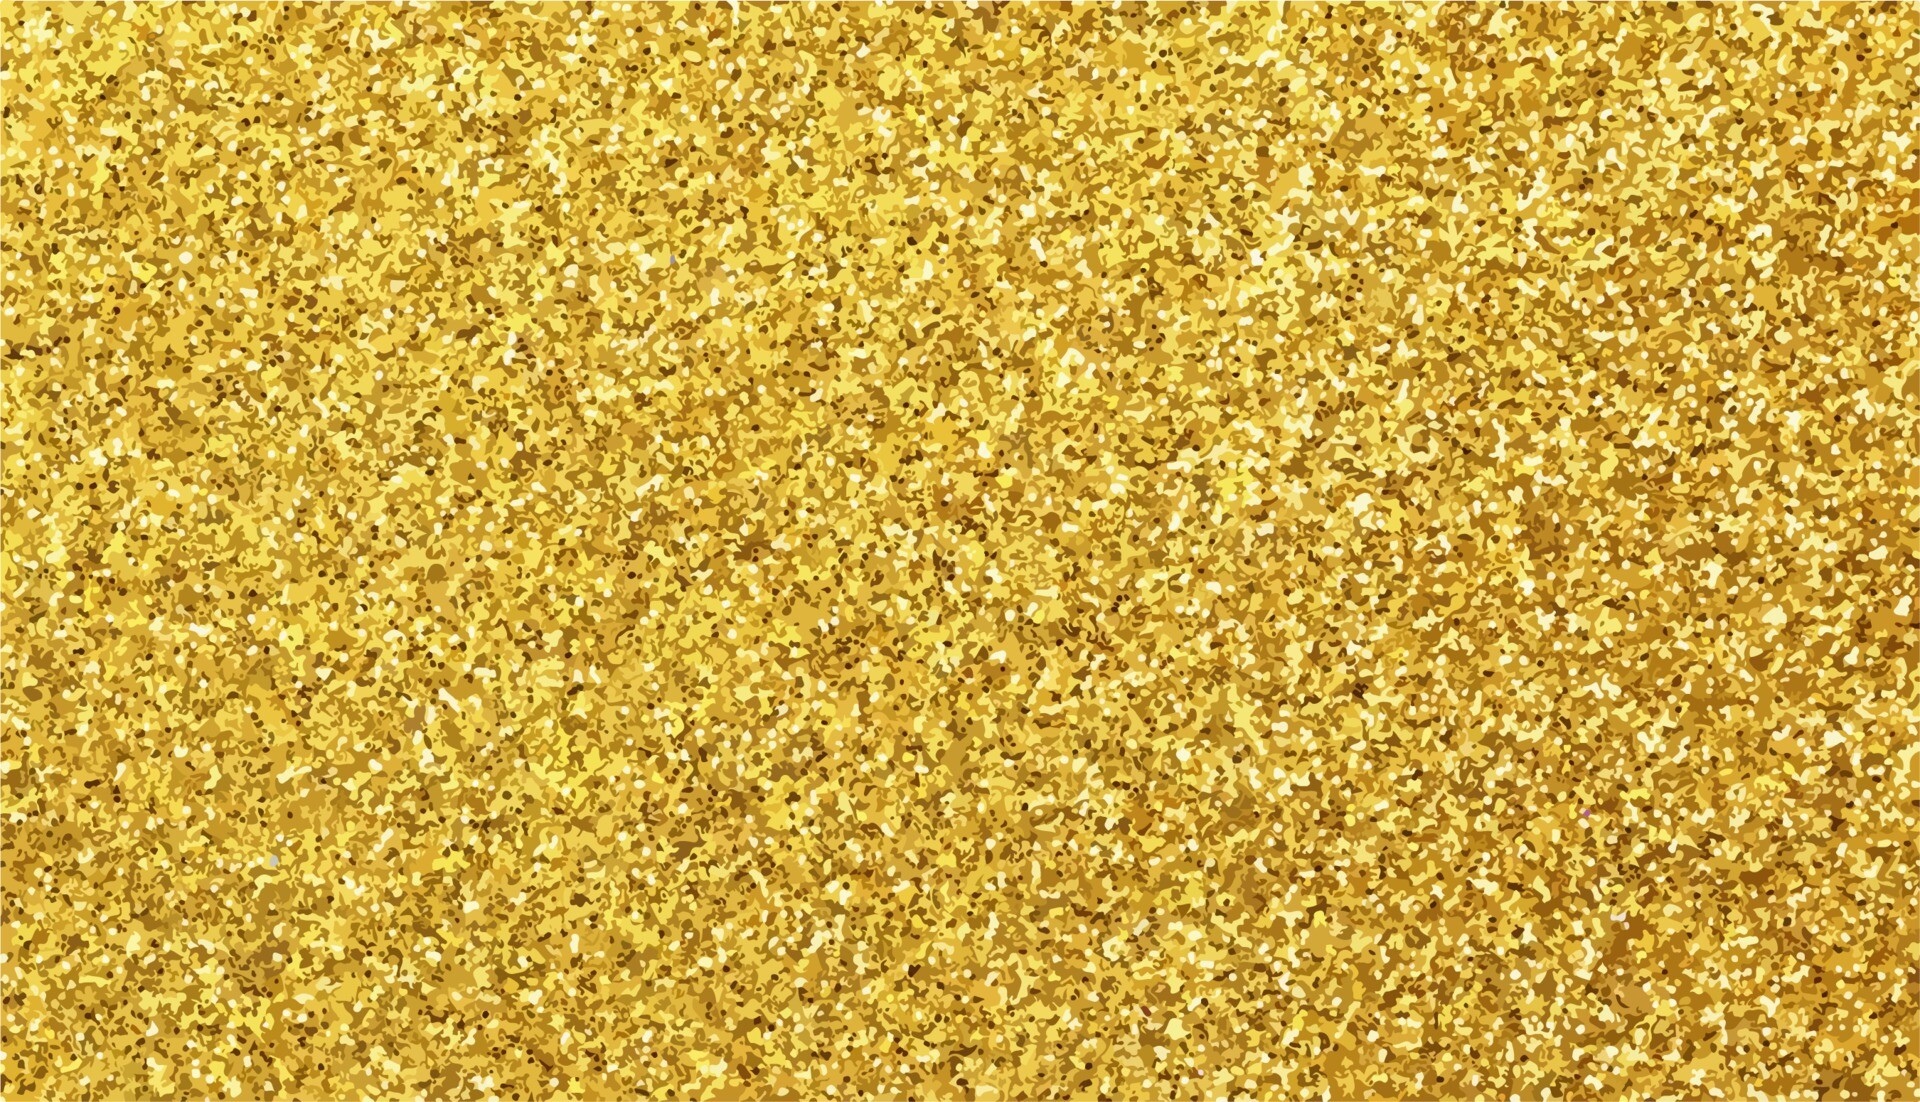 Gold Glitter: The golden sand - an assortment of small and shiny particles of a precious metal. 1920x1110 HD Background.